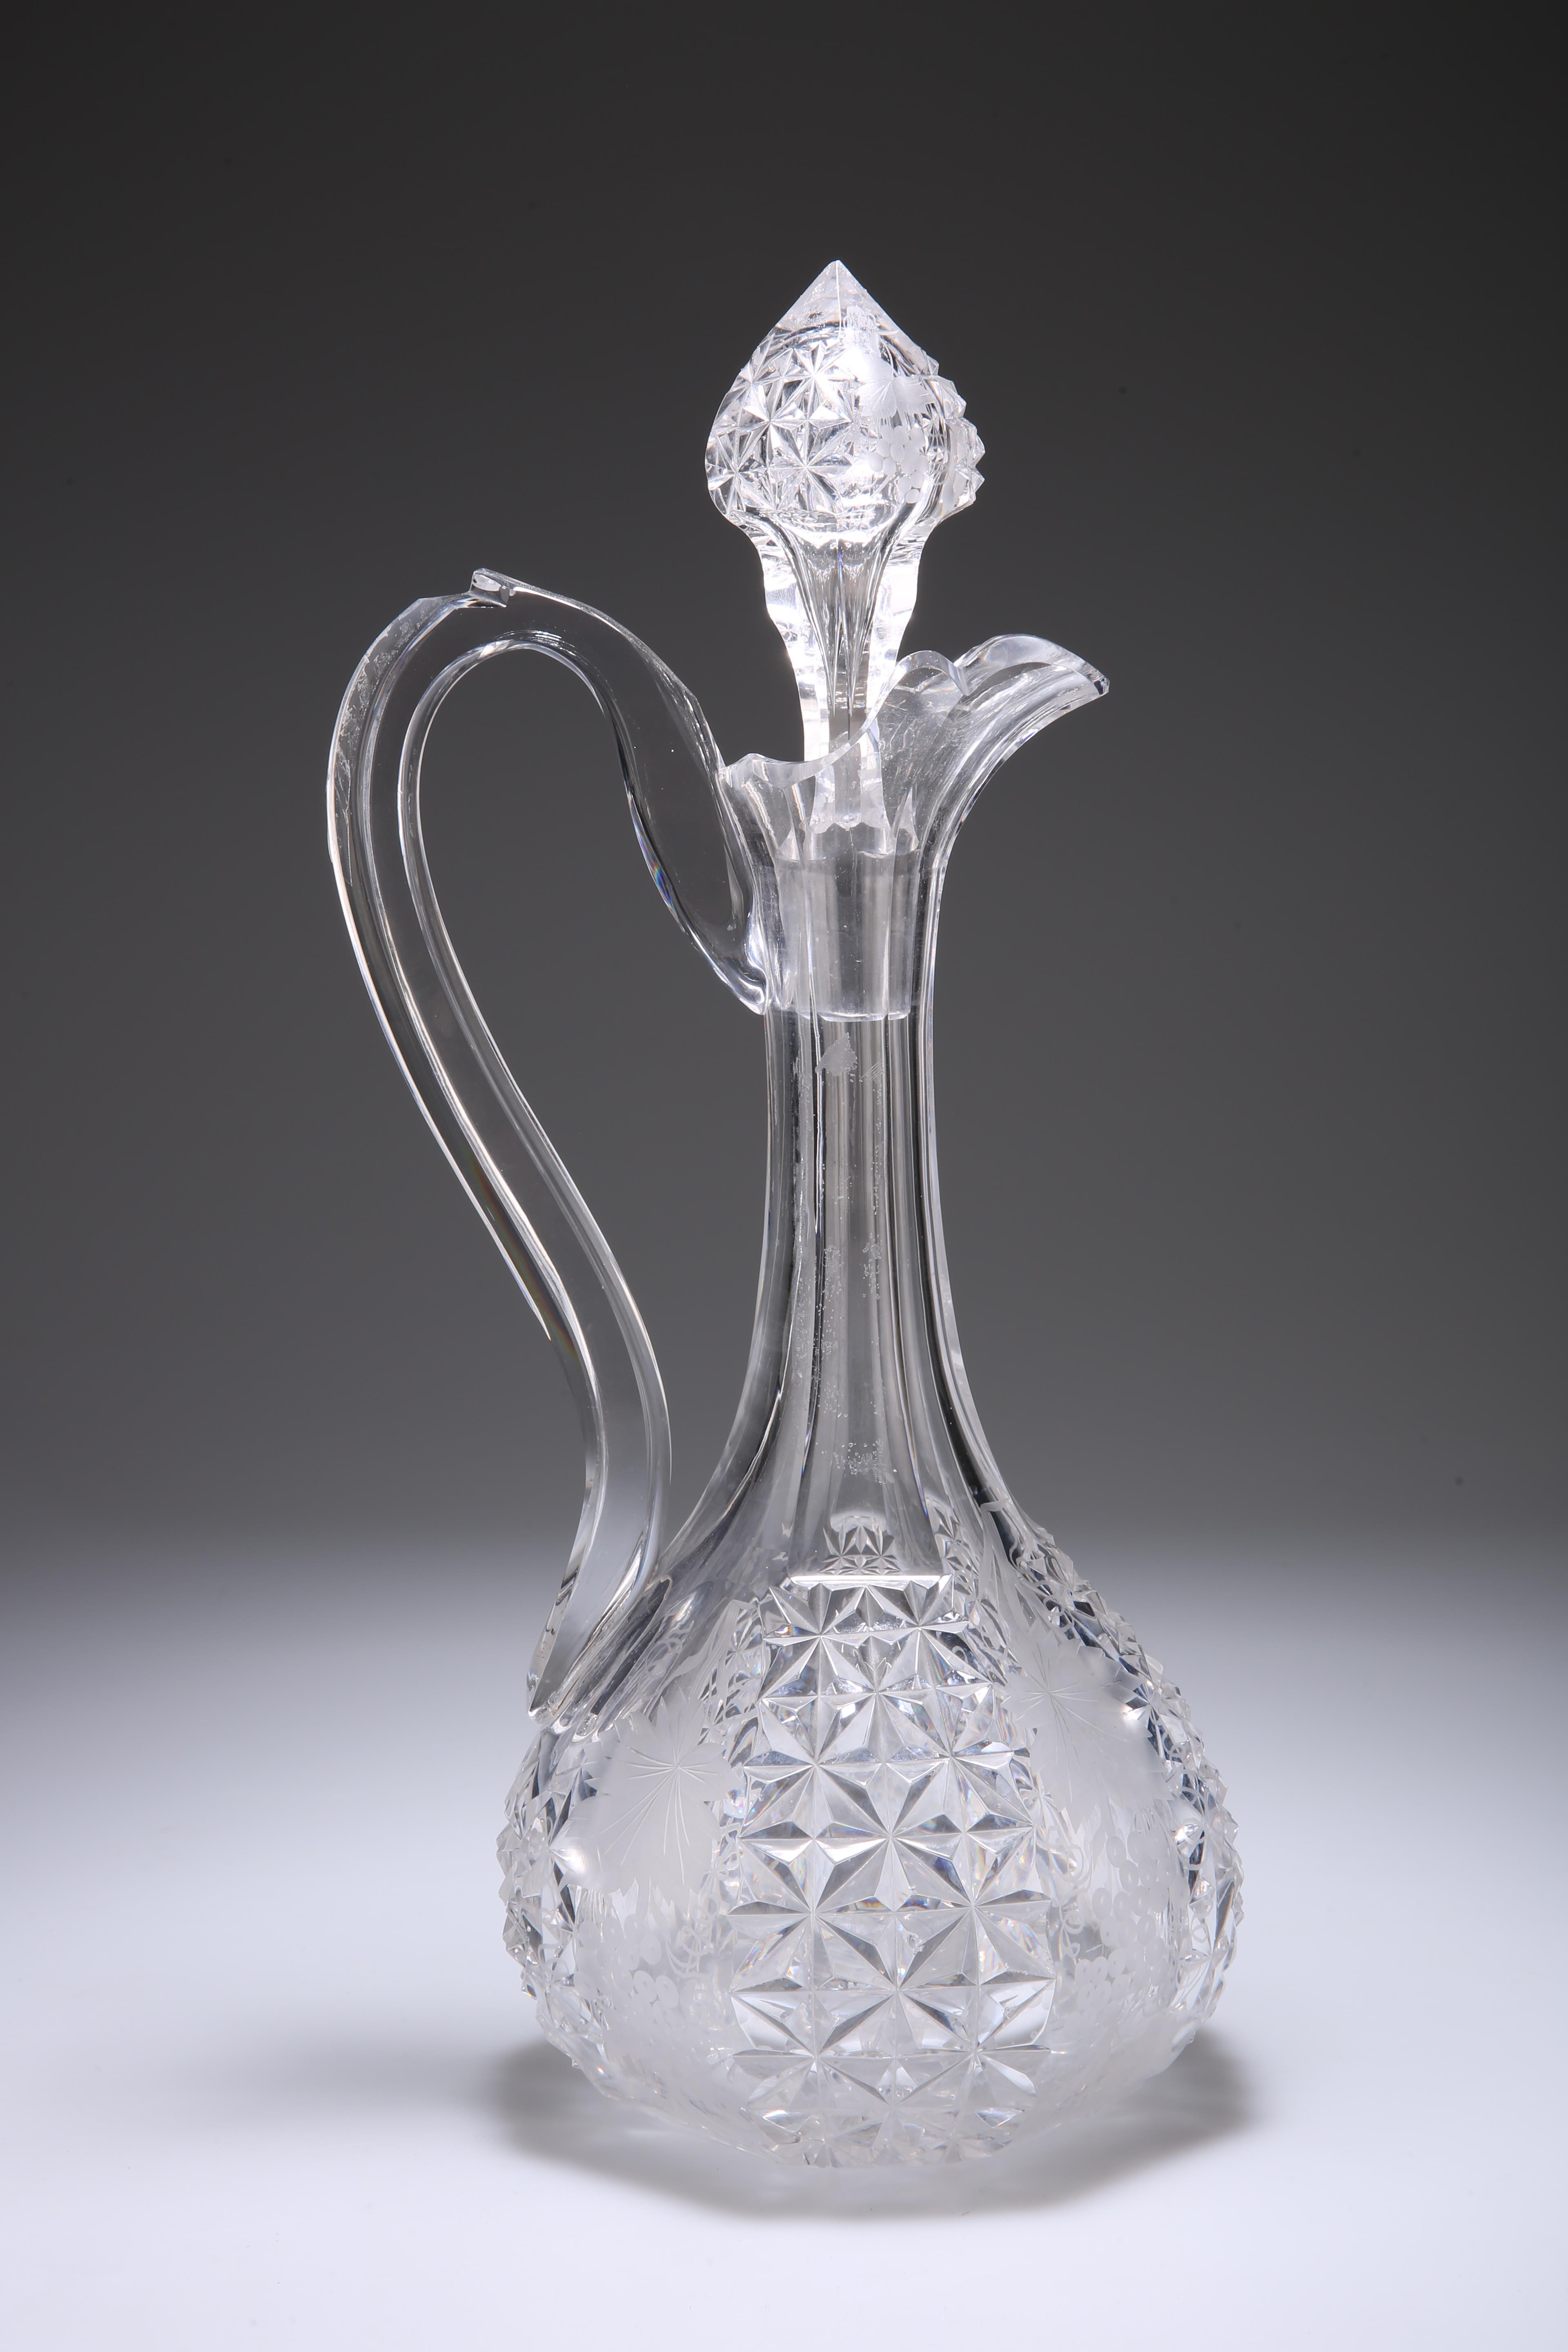 A LATE 19TH CENTURY CUT-GLASS CLARET JUG, the bulbous base issuing a faceted slender neck housing